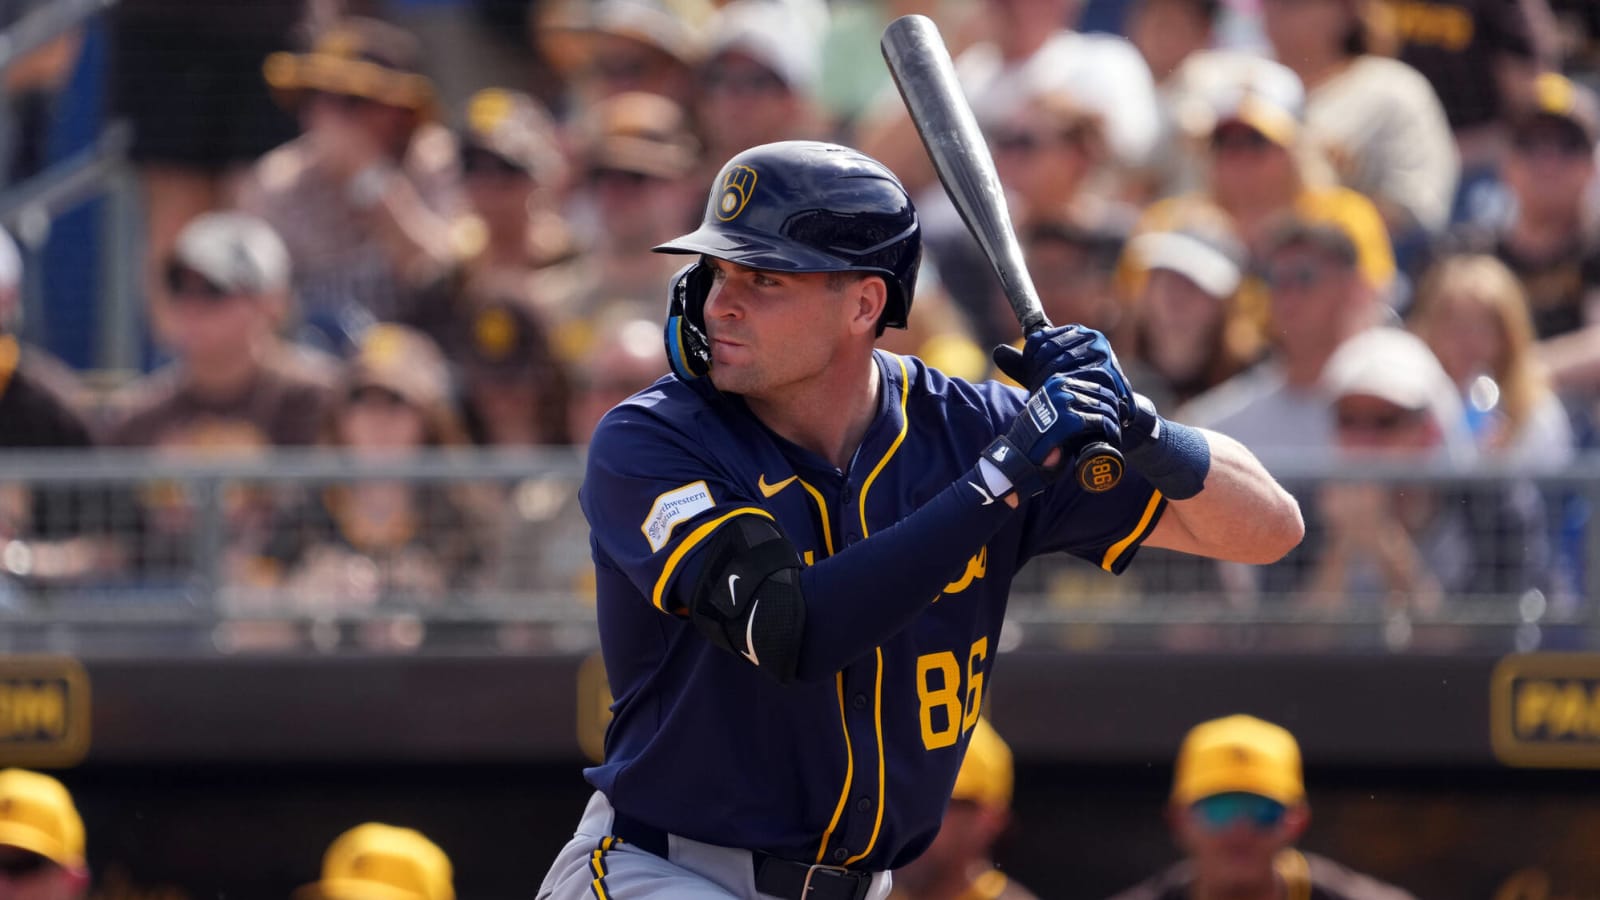 Brewers expected to promote acclaimed infield prospect